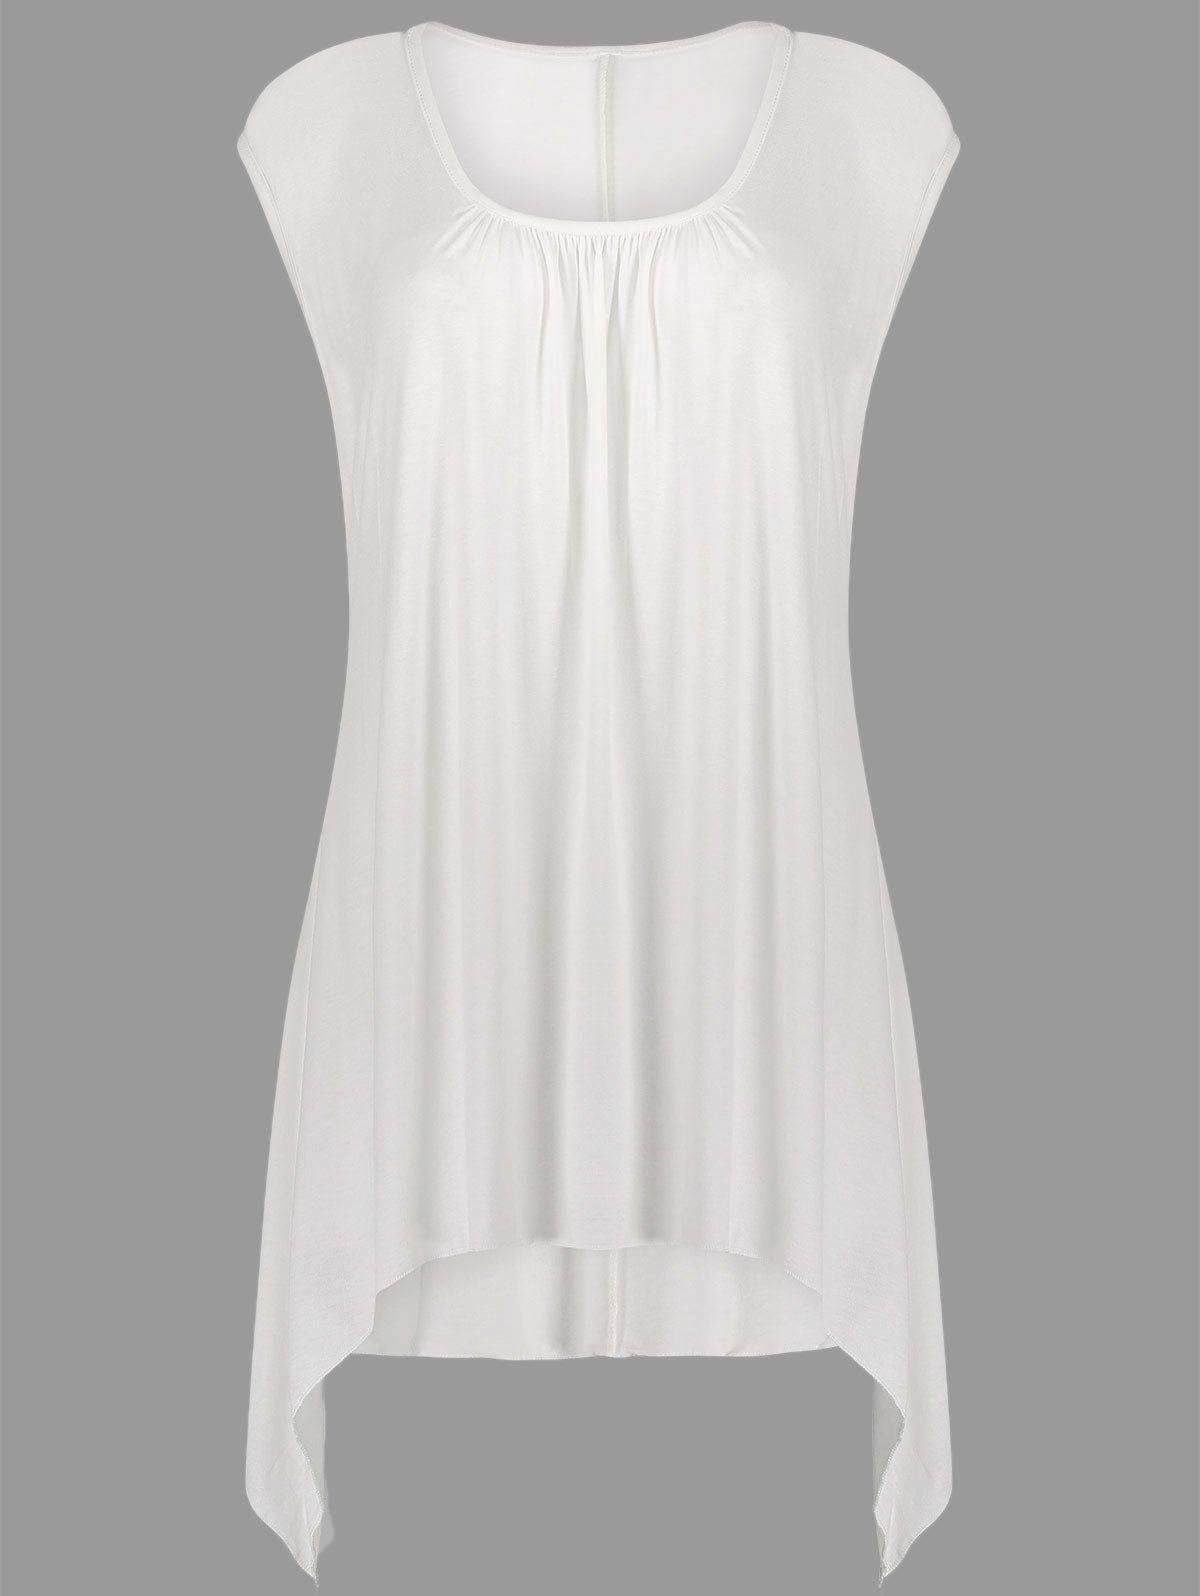 [41% OFF] 2020 Oversized Tunic Tank Top In WHITE | DressLily